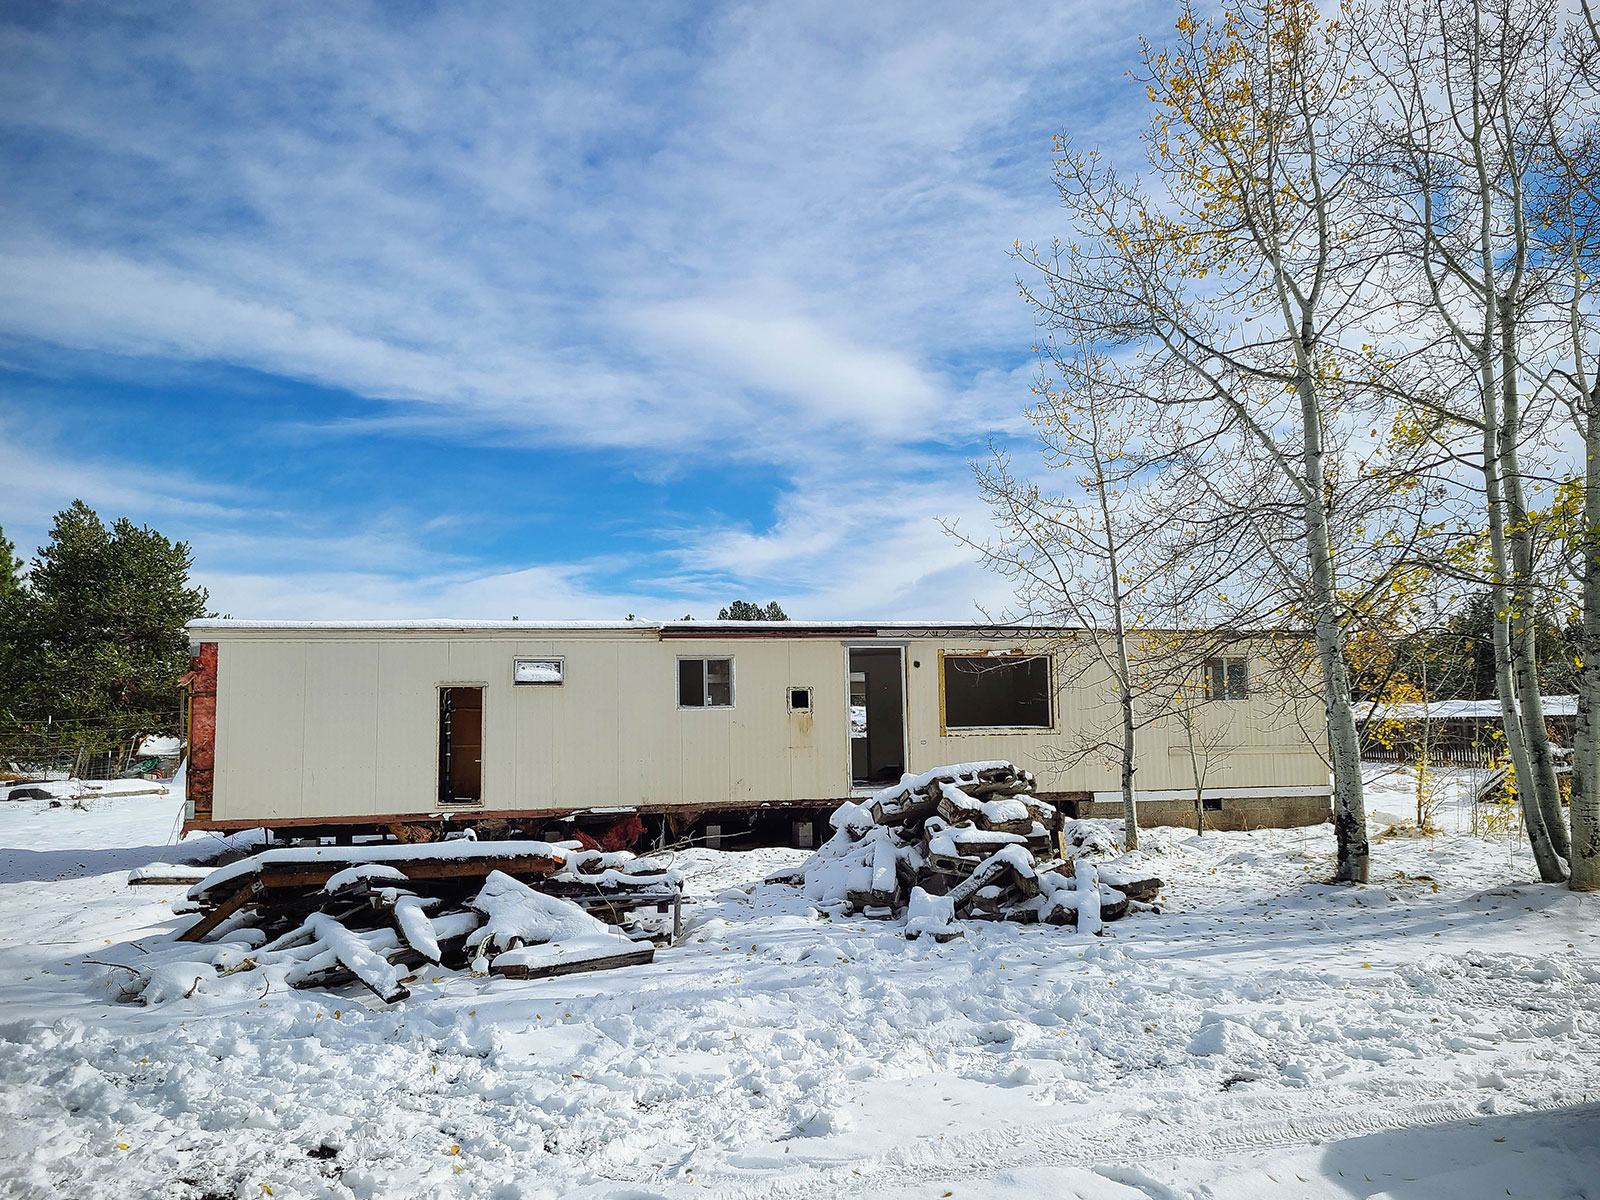 Older manufactured home with missing windows and doors, set in a snowy yard with debris piles in front